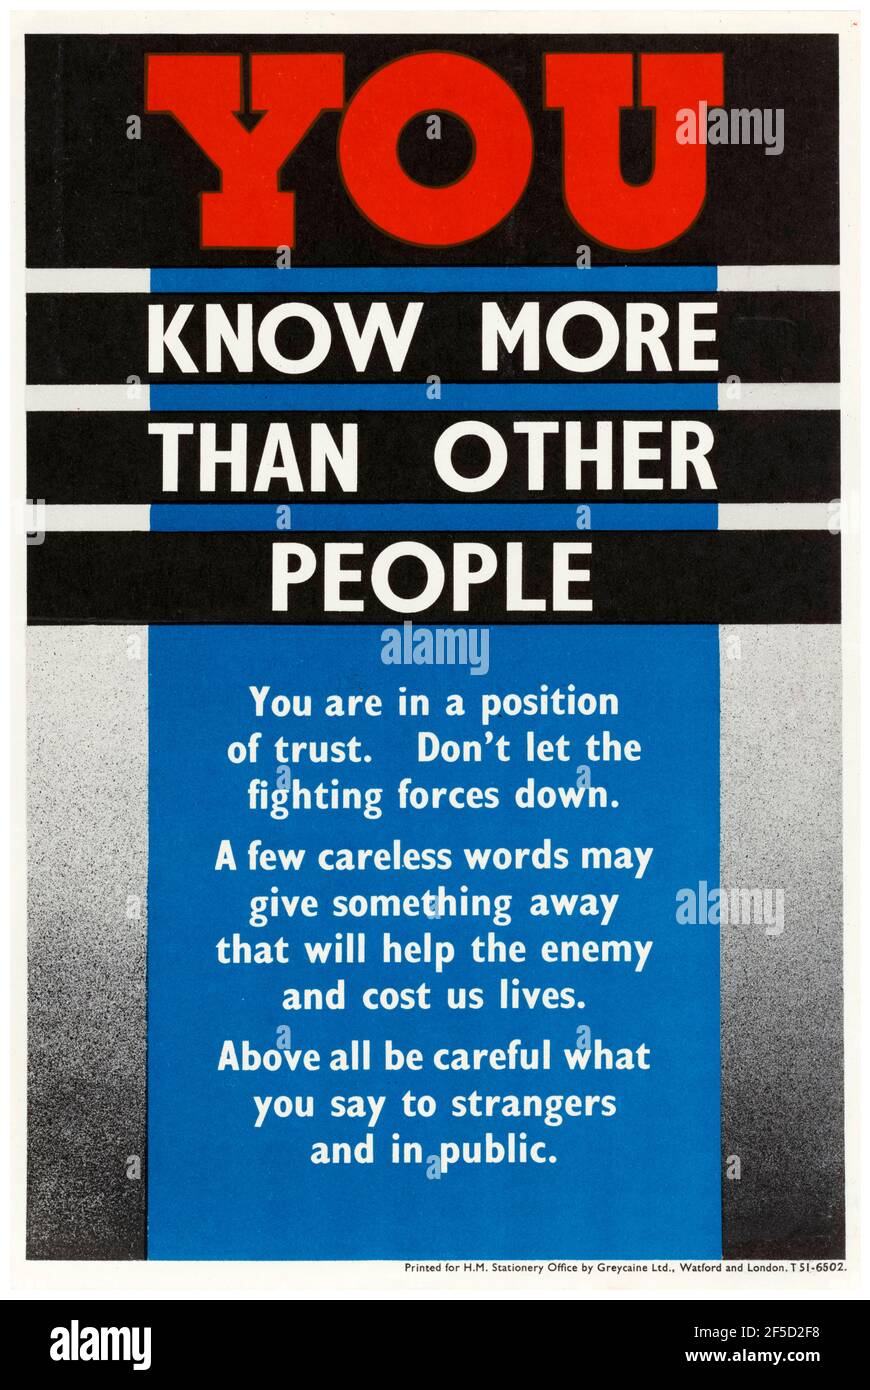 You Know More than Other People, Careless Talk, British, WW2 Public Information Poster, 1942-1945 Stock Photo